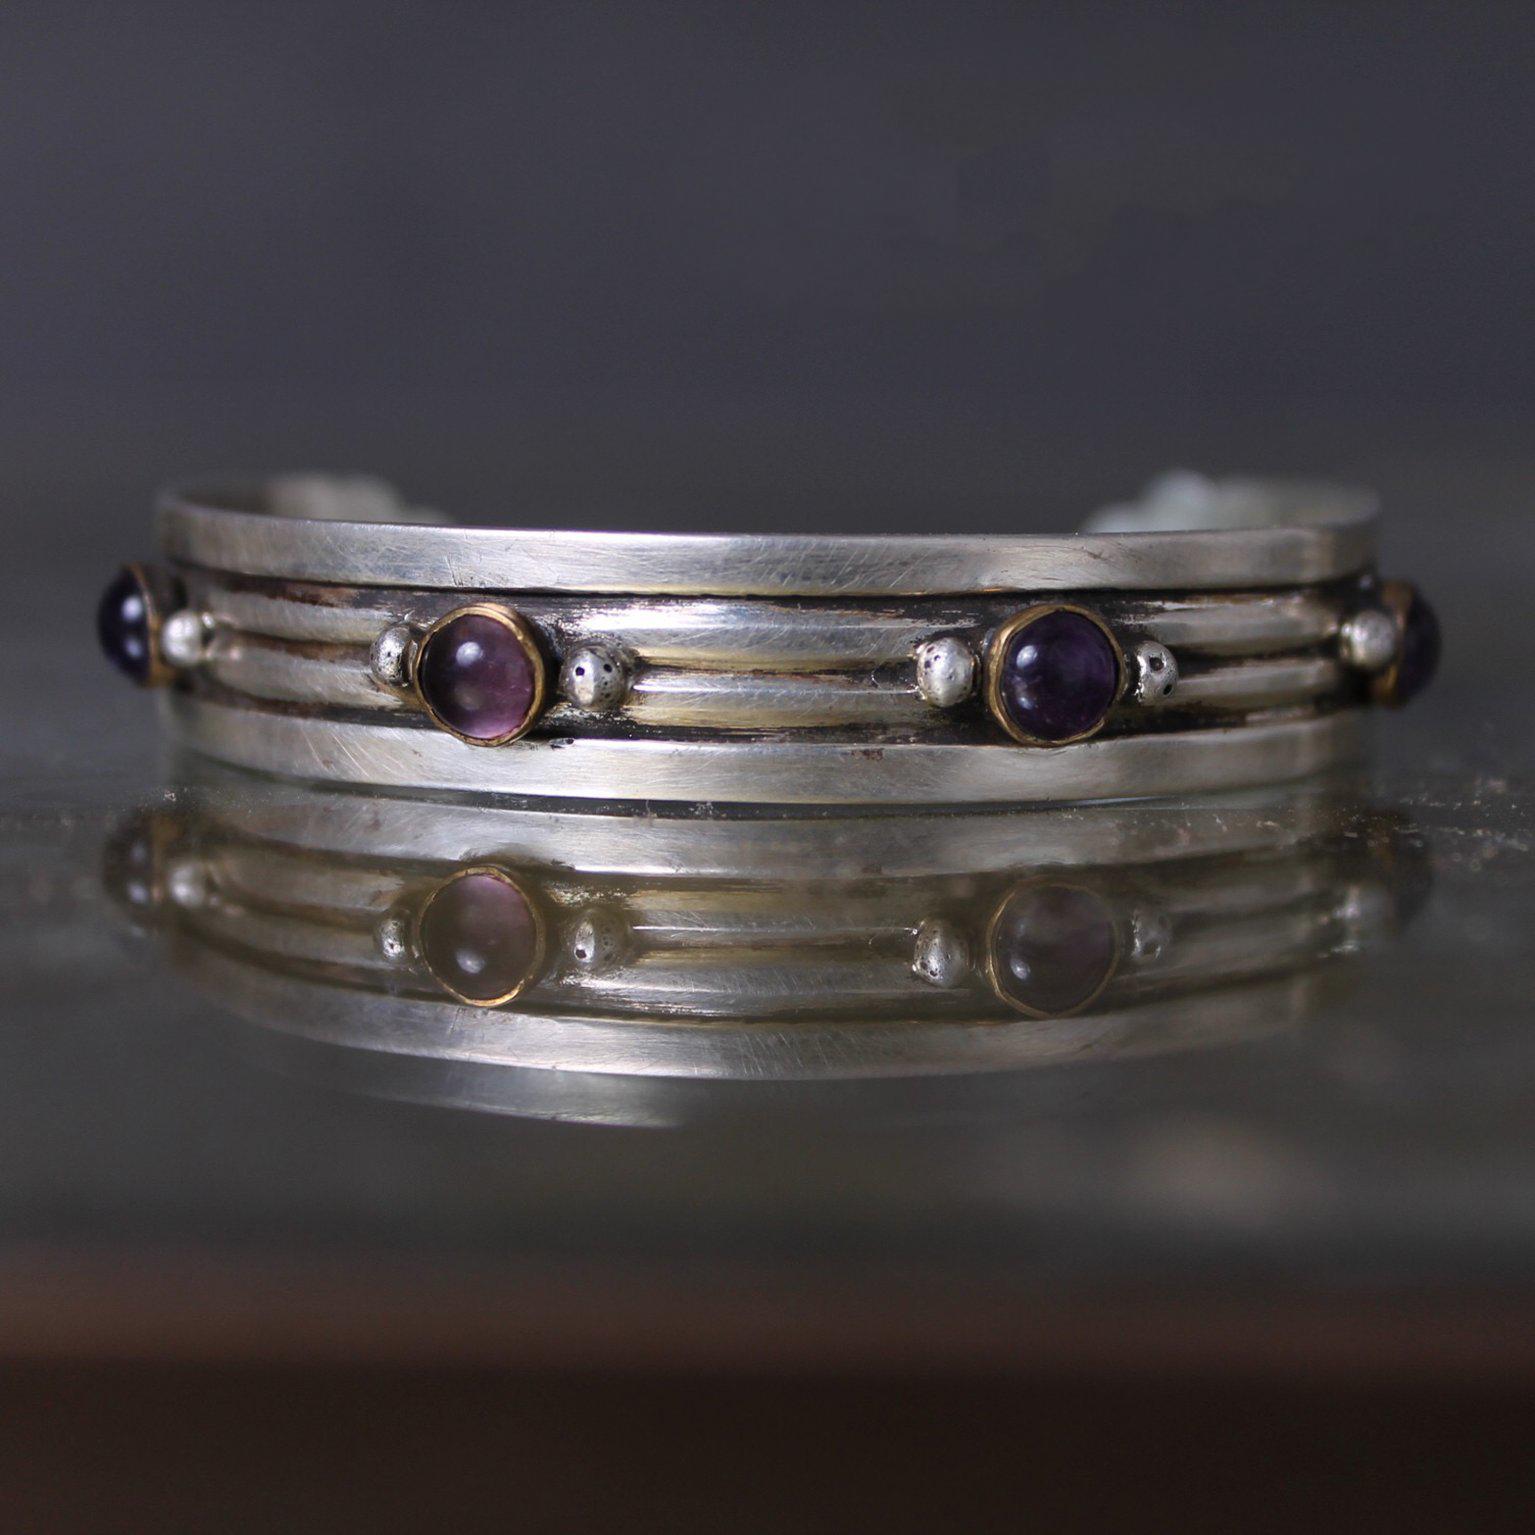 Mexican William Spratling Cuff Bracelet Sterling, Brass and Amethyst